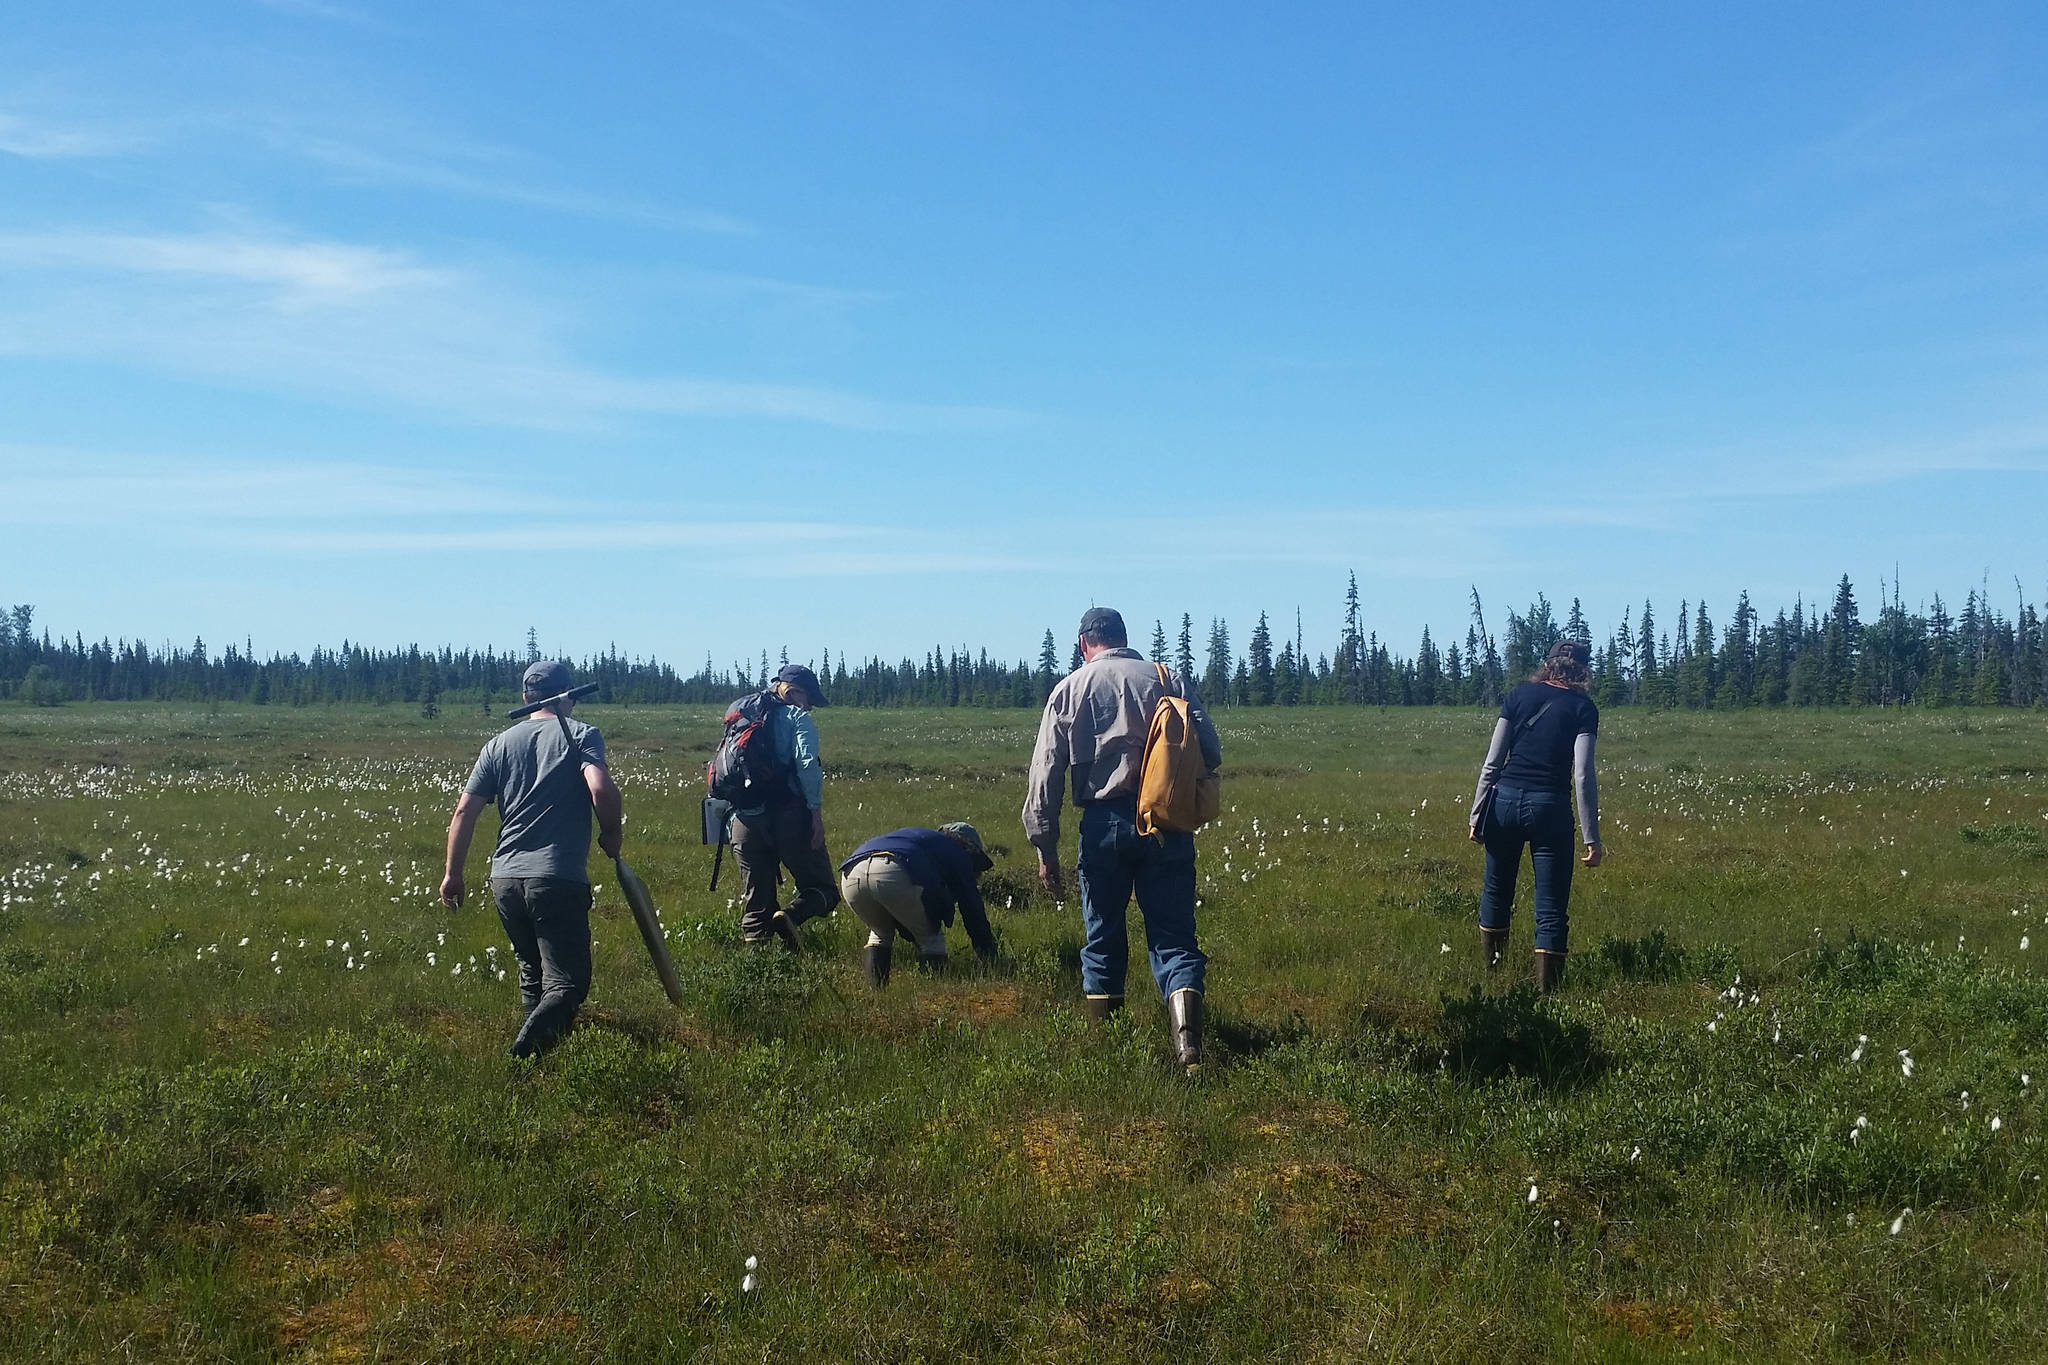 Workshop participants make their way into some peatlands near Anchor Point, Alaska for a field demonstration on July 18, 2018. (Photo by Mira Klein)